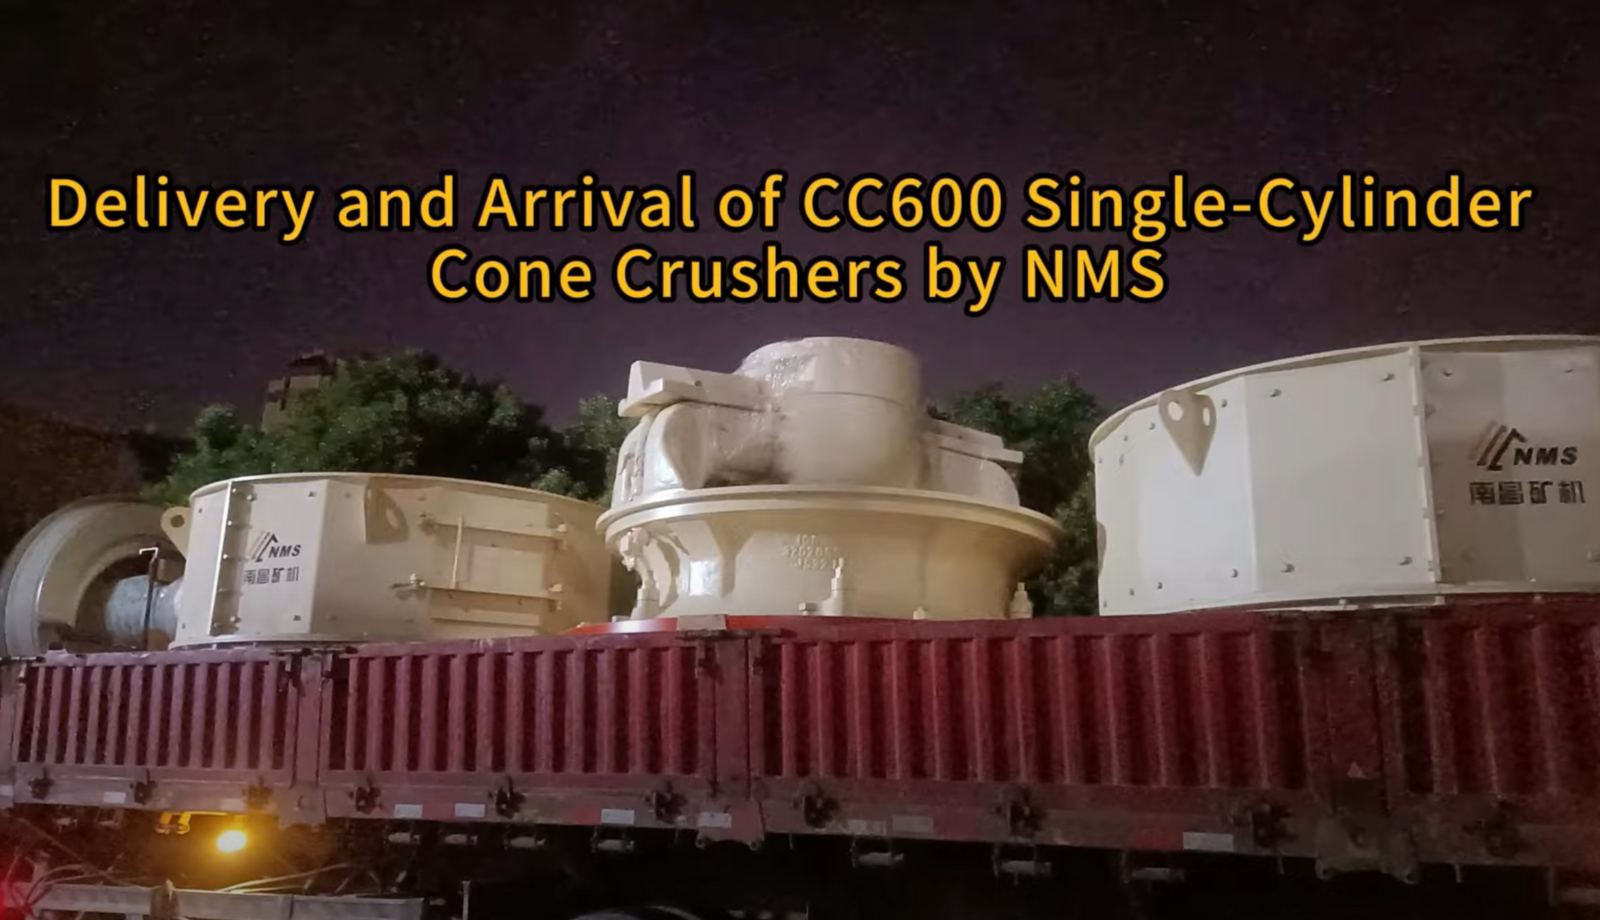 Delivery and Arrival of CC600 Single-Cylinder Cone Crushers by NMS